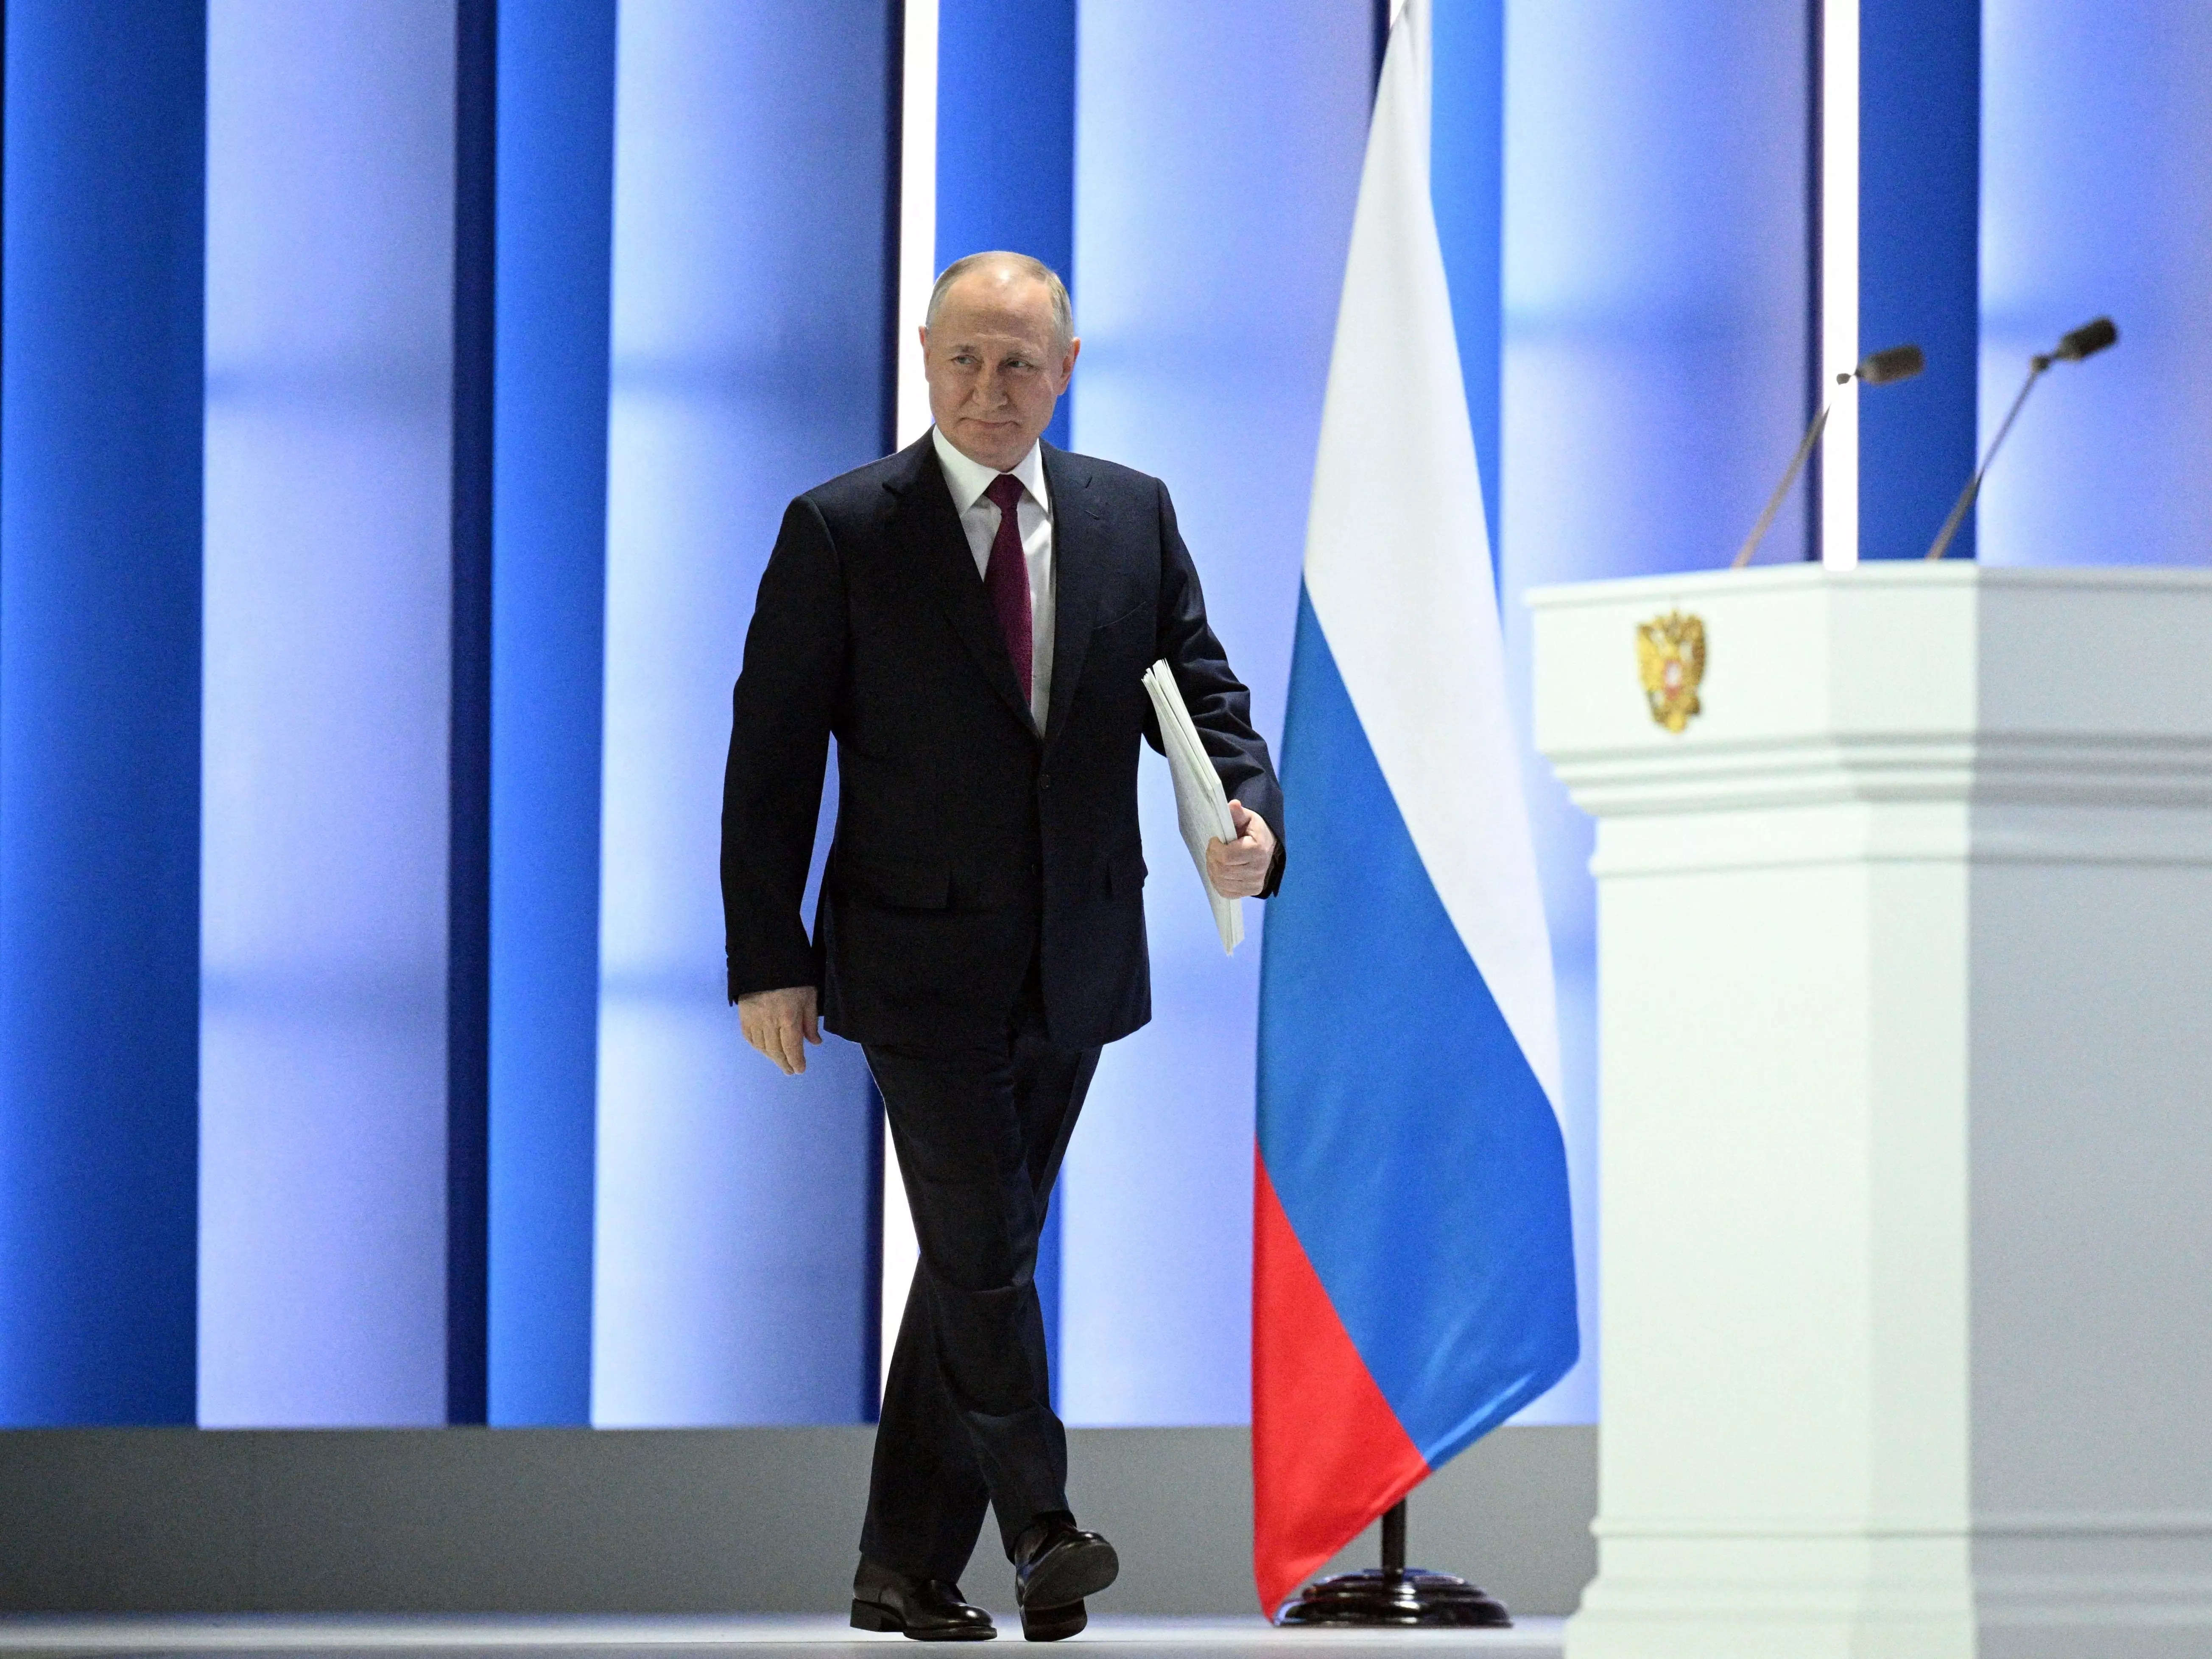 Russian President Vladimir Putin arrives to deliver his annual state of the nation address at the Gostiny Dvor conference centre in central Moscow on February 21, 2023.